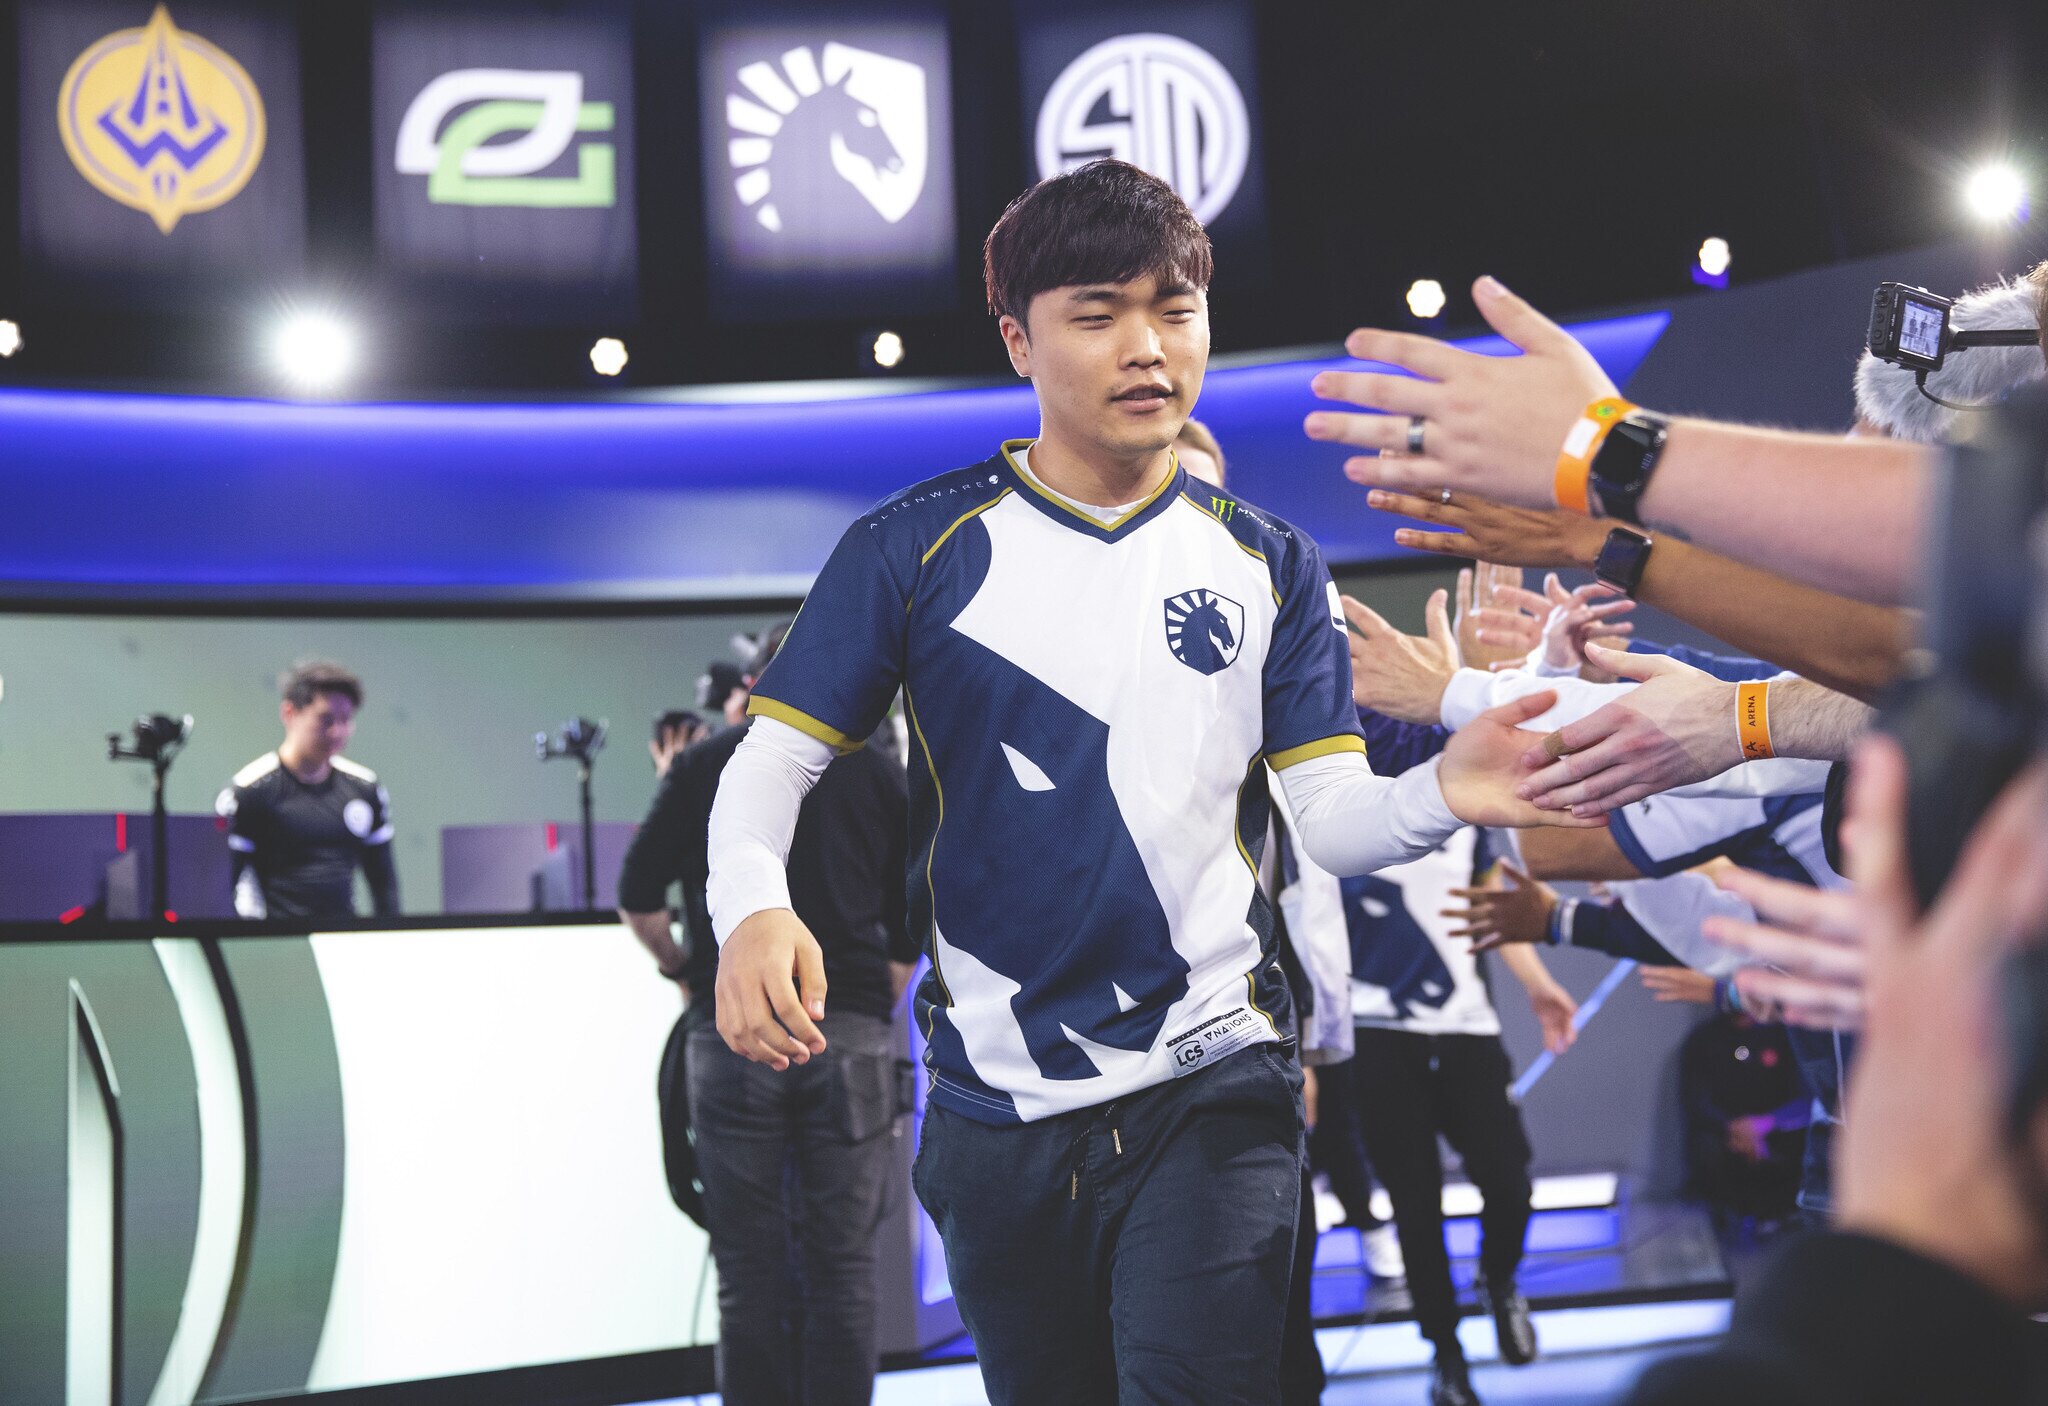 Week1 of the LCS Summer Season saw Team Liquid run both hot and cold. (Photo by Colin Young-Wolff/Riot Games)